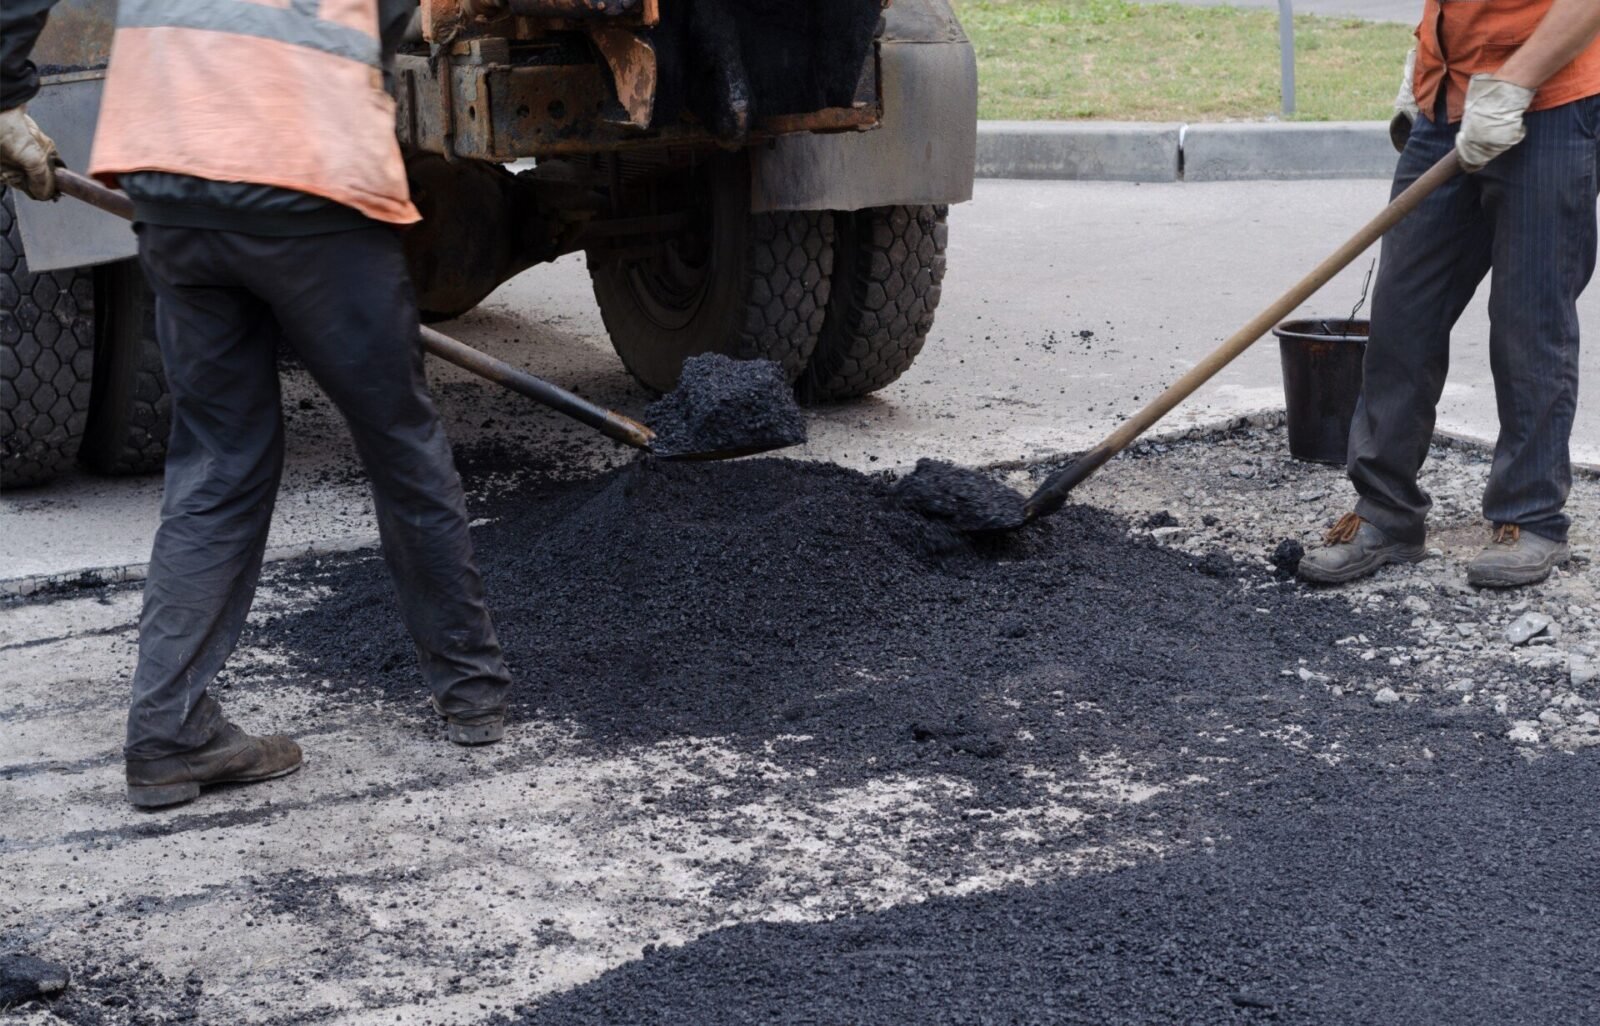 Two road workers wearing safety vests and gloves are seen raking and spreading hot asphalt on a road in Riviera Beach, FL. They are working next to a truck, which is dispensing the asphalt provided by Palm Beach Asphalt. The ground around them is partially covered with freshly laid asphalt.